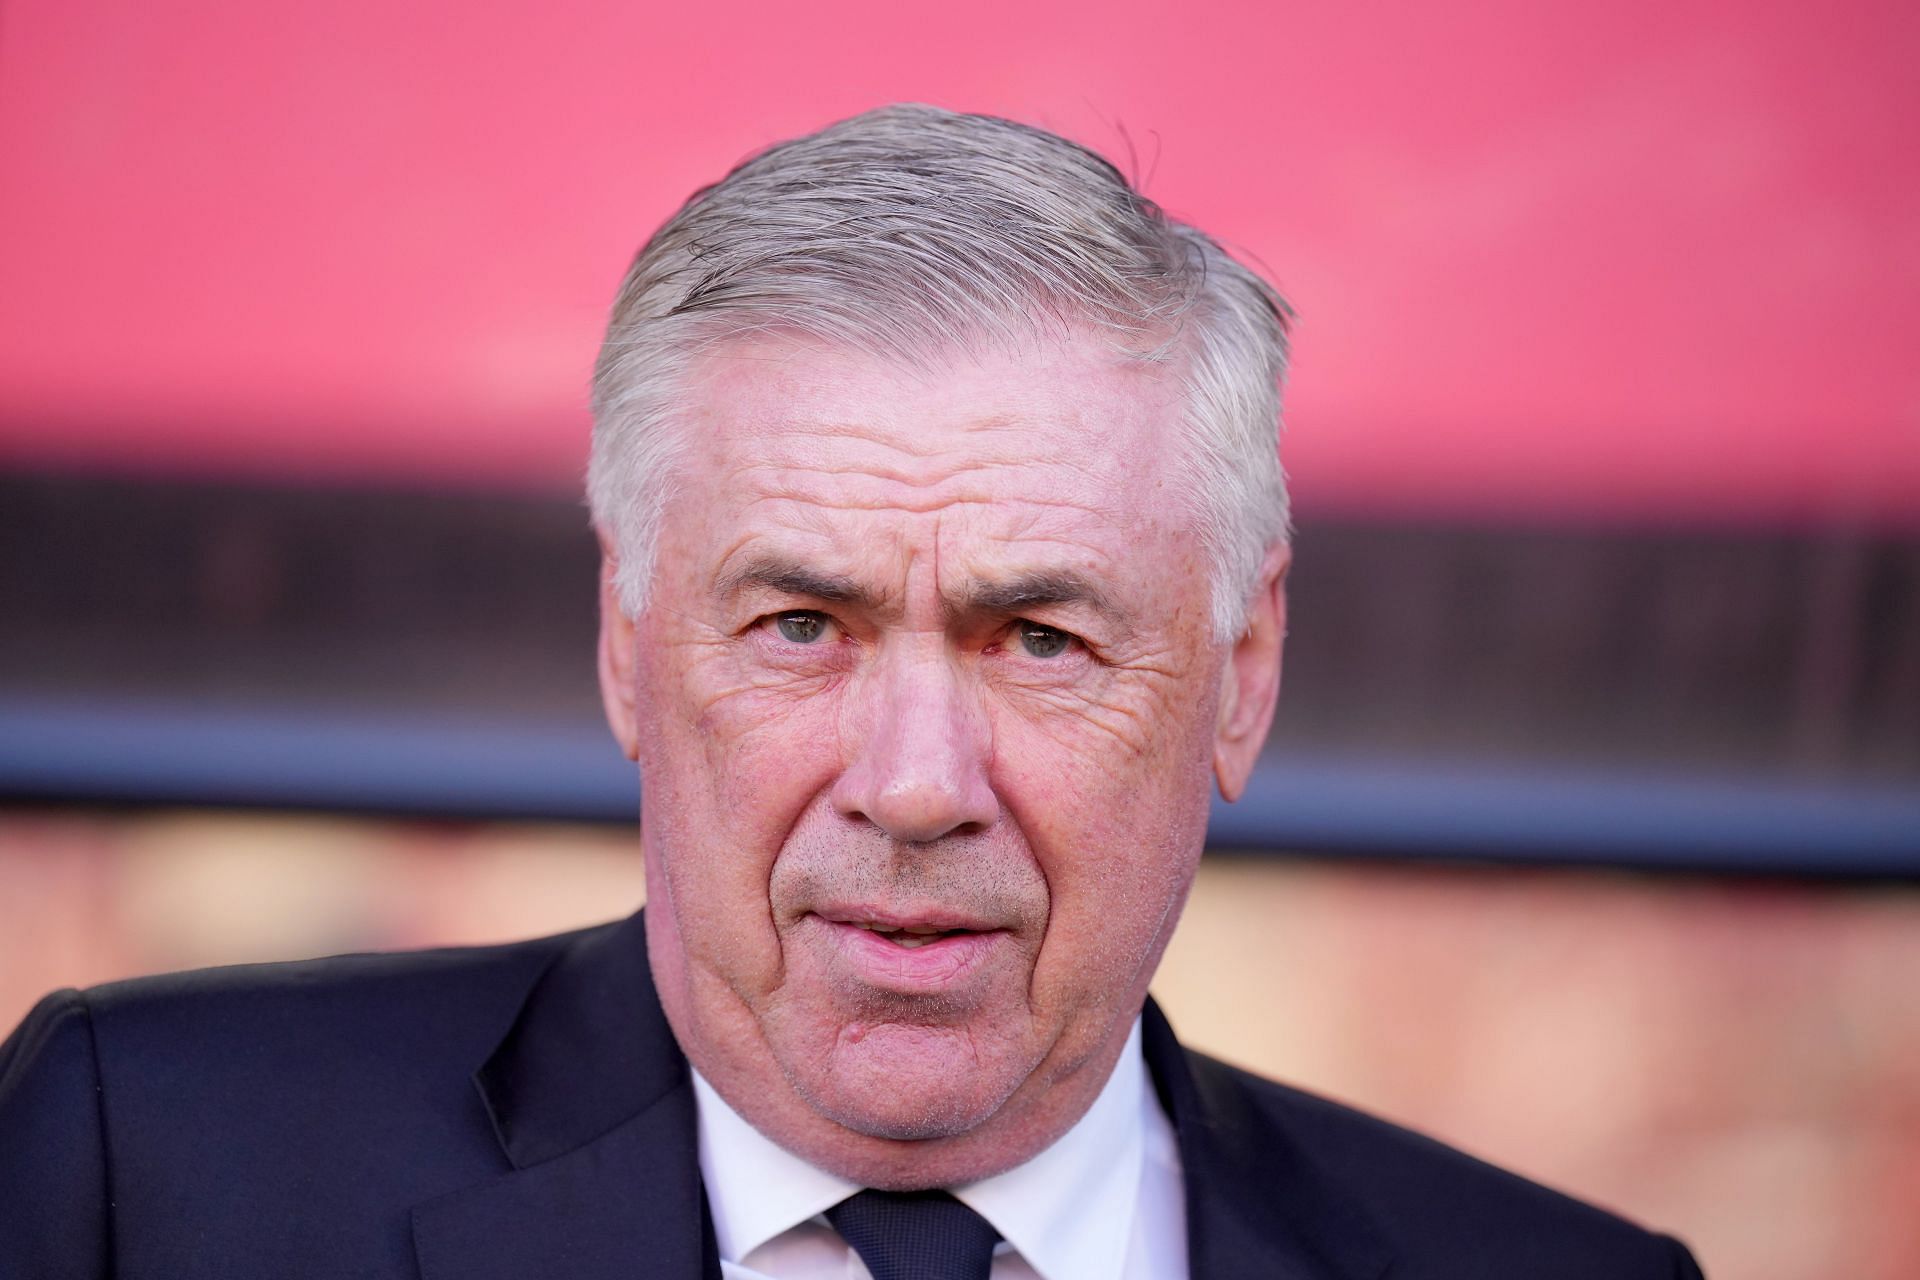 Carlo Ancelotti is one of the finest managers in the world right now